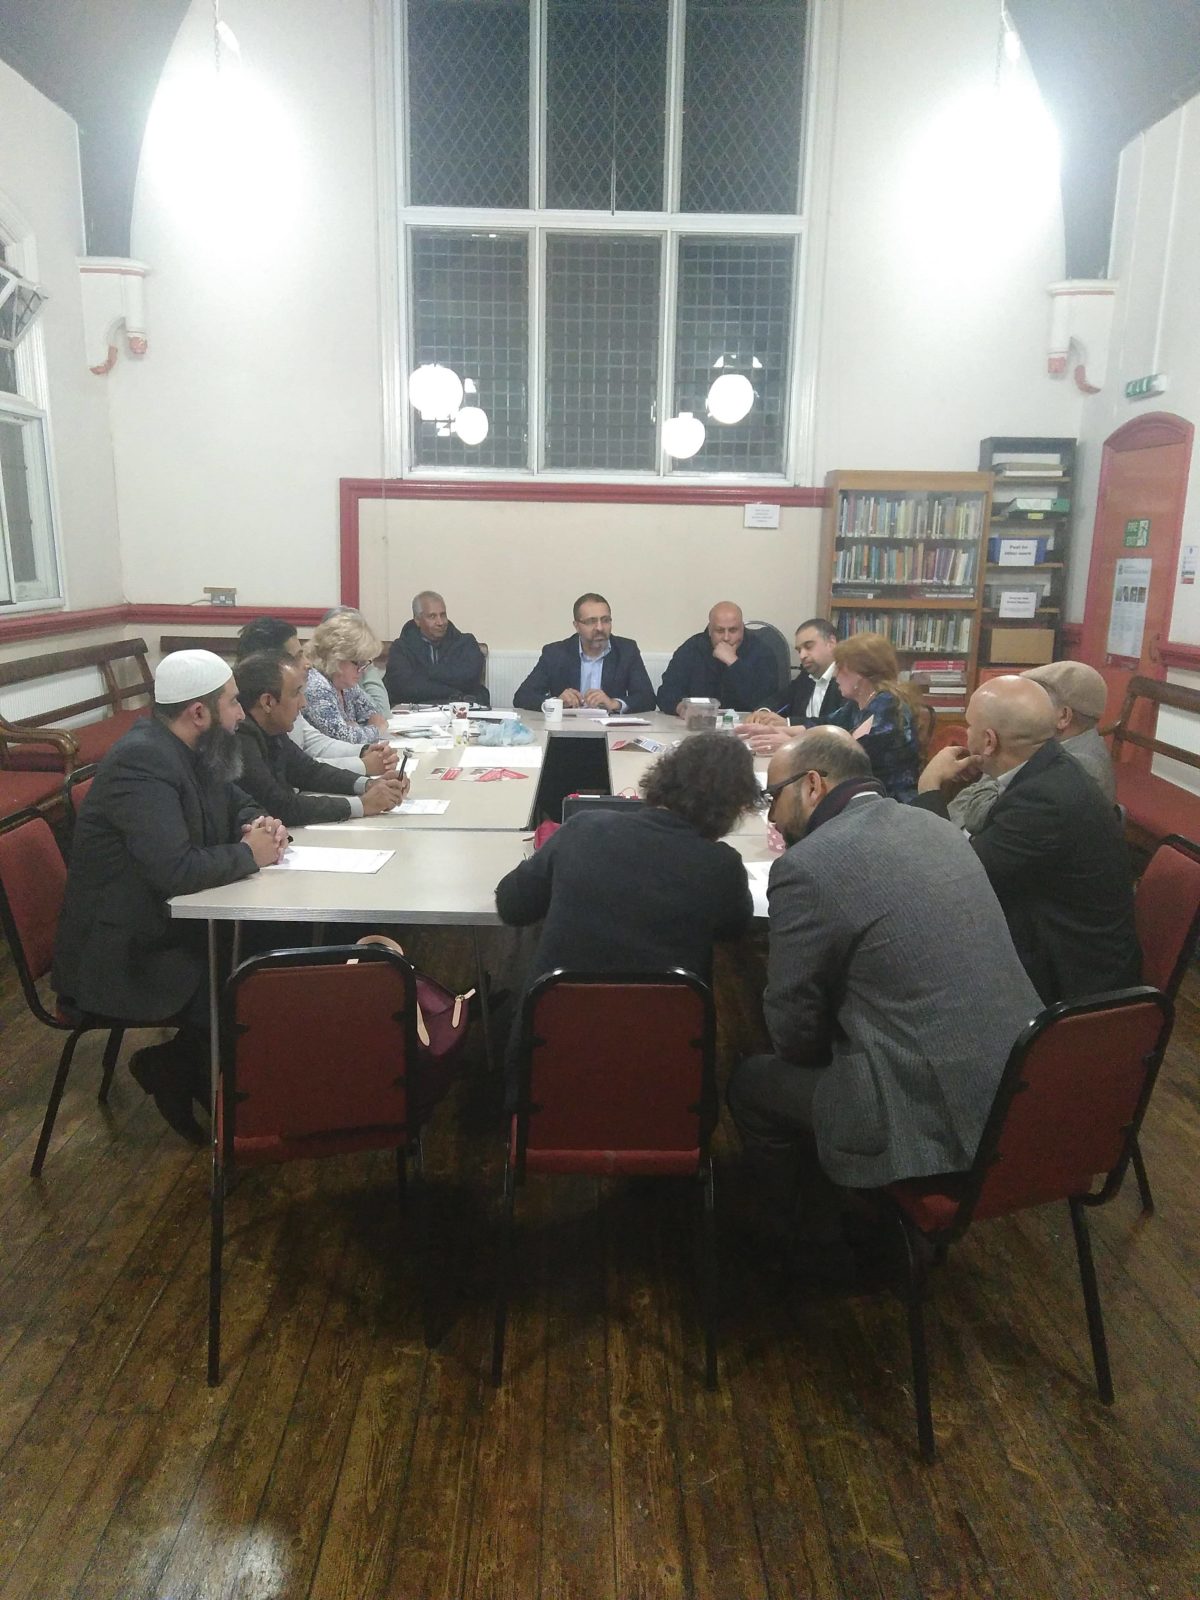 Hall Green Labour members question the Chair and Secretary of the Constituency party.